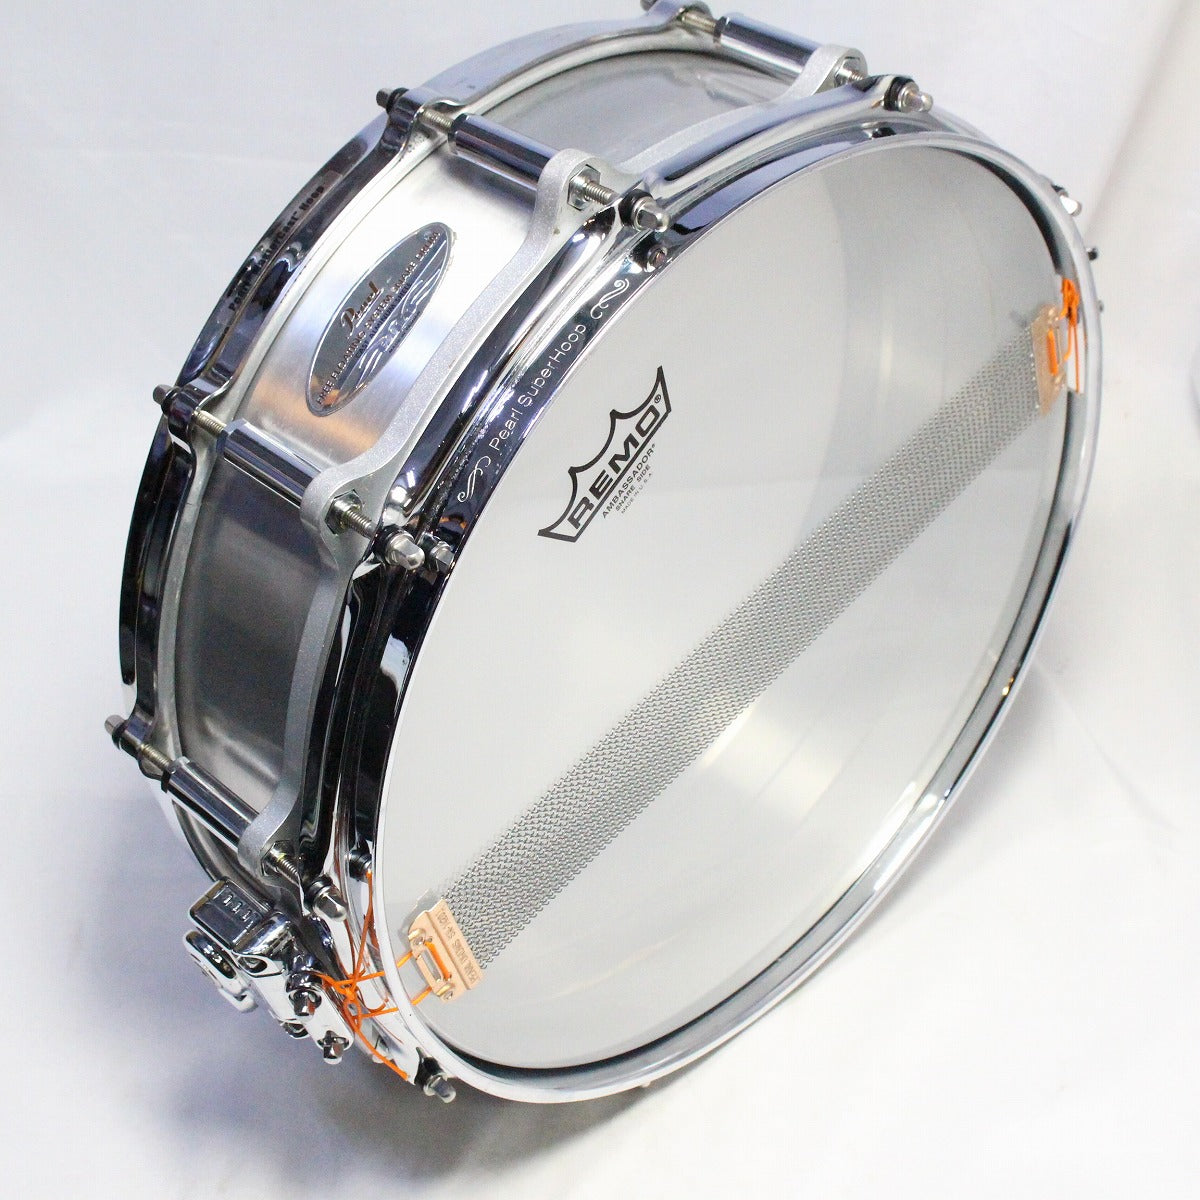 USED PEAEL / FCA1445/C 14 x 4.5 Ultra Cast Free-Floating Snare Drum supervised by Shuichi Ponta Murakami [08]